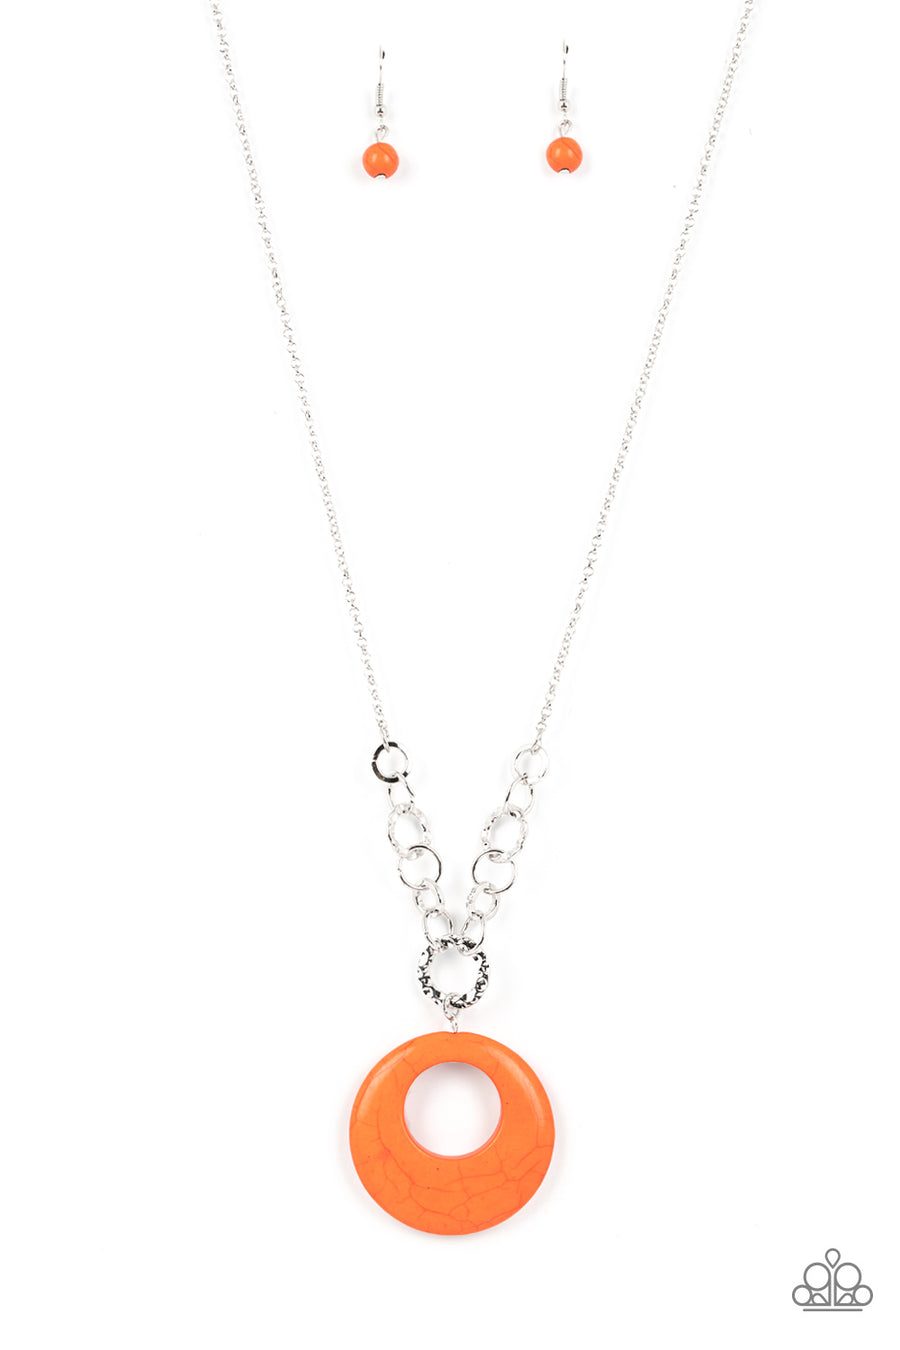 Hidden Dune - Orange Necklace - Paparazzi Accessories - A mismatched collection of textured and smooth silver links gives way to an oversized orange stone hoop at the bottom of an extended silver chain, resulting in an earthy centerpiece.